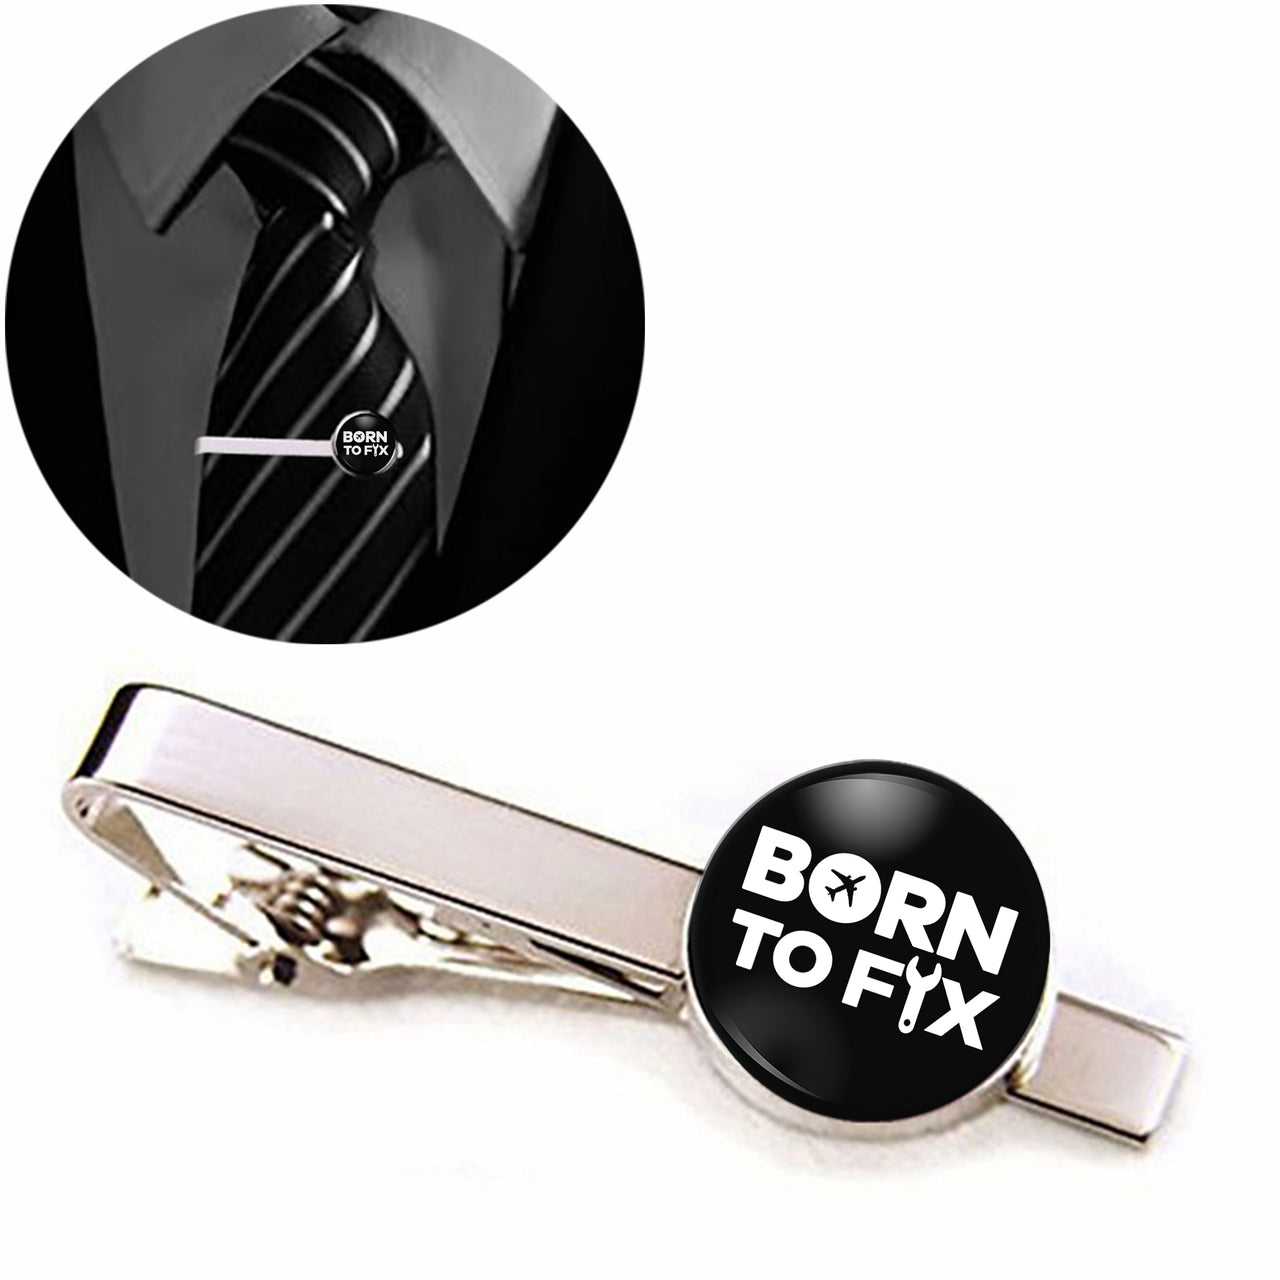 Born To Fix Airplanes Designed Tie Clips